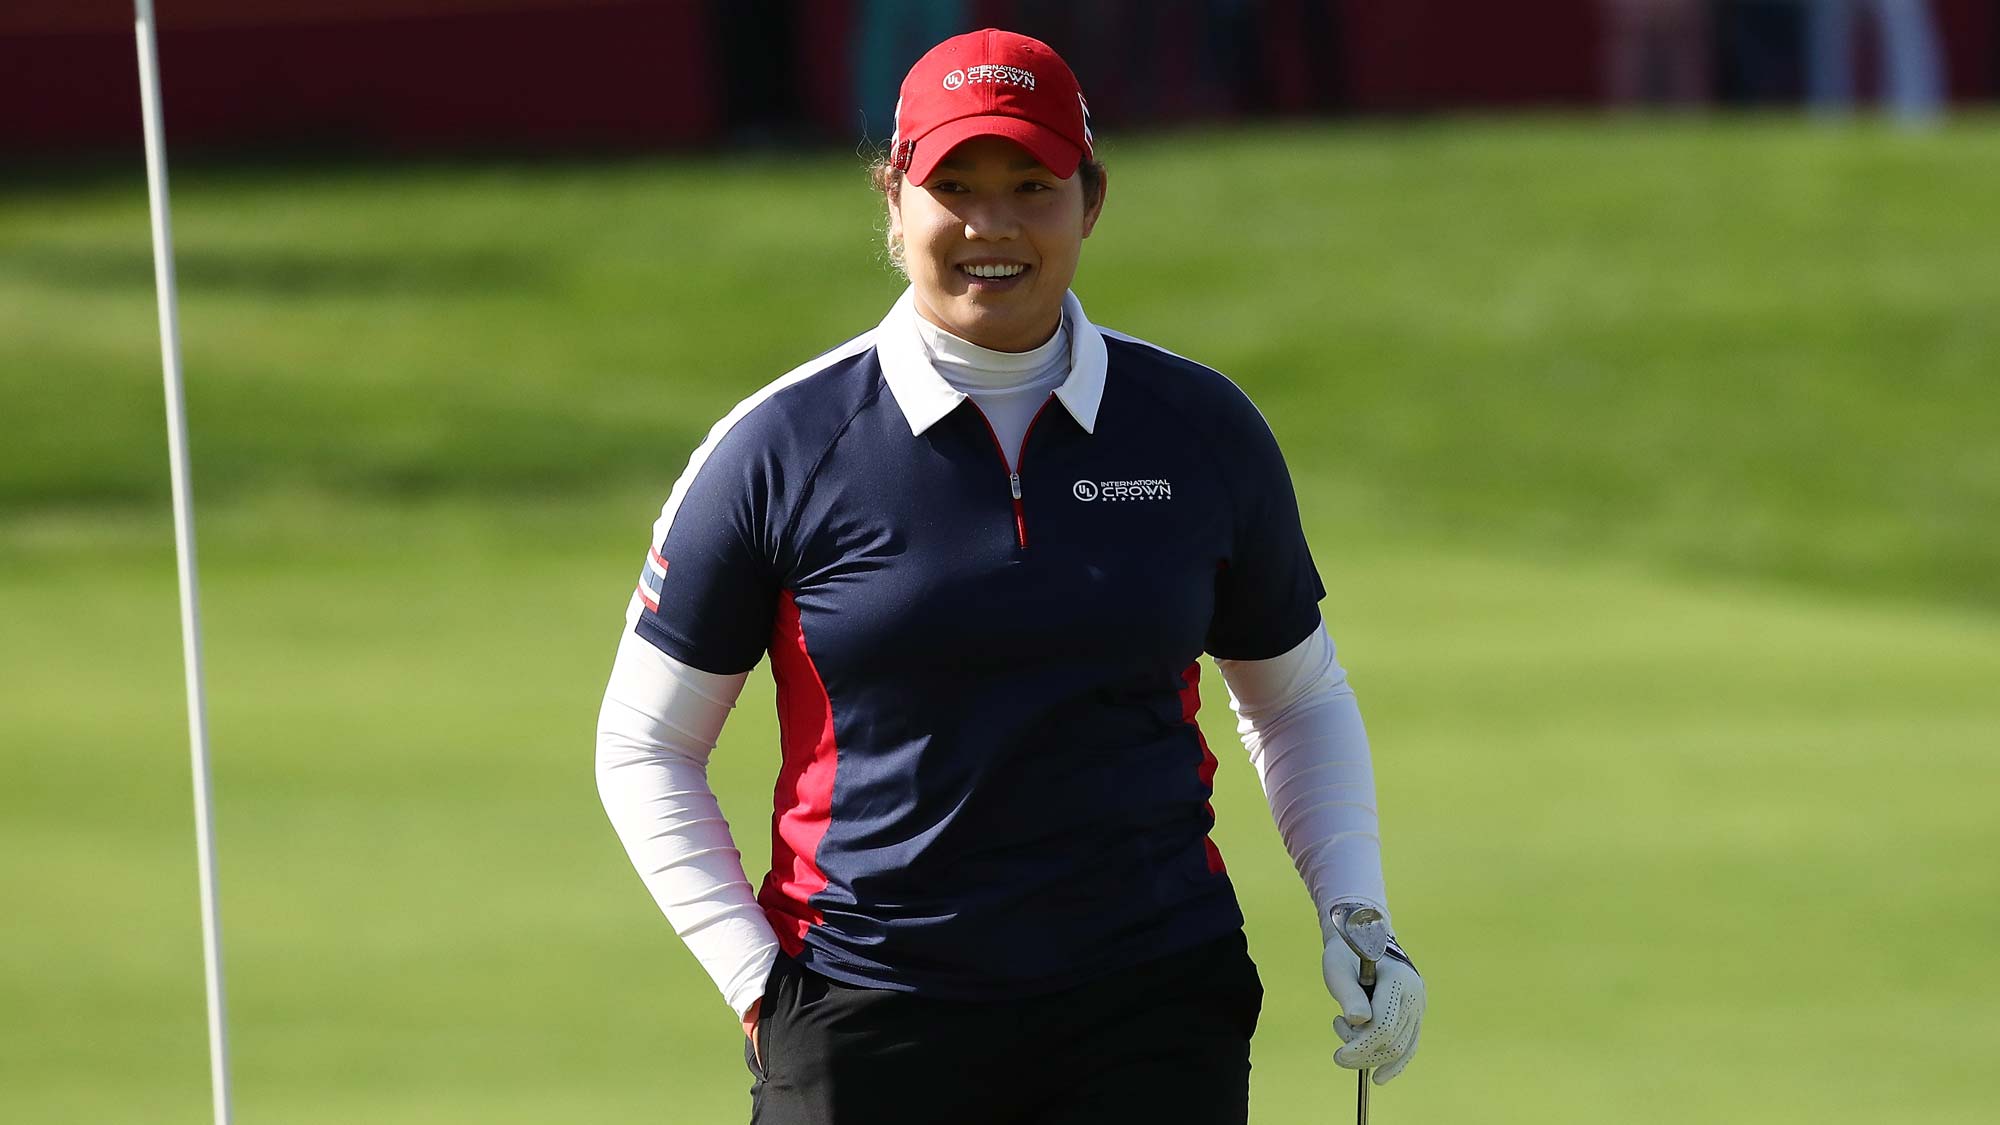 Ariya Jutanugarn of Thailand celebrates her chip-in eagle to win the Wild-Card Playoff on the 14th hole on day four of the UL International Crown